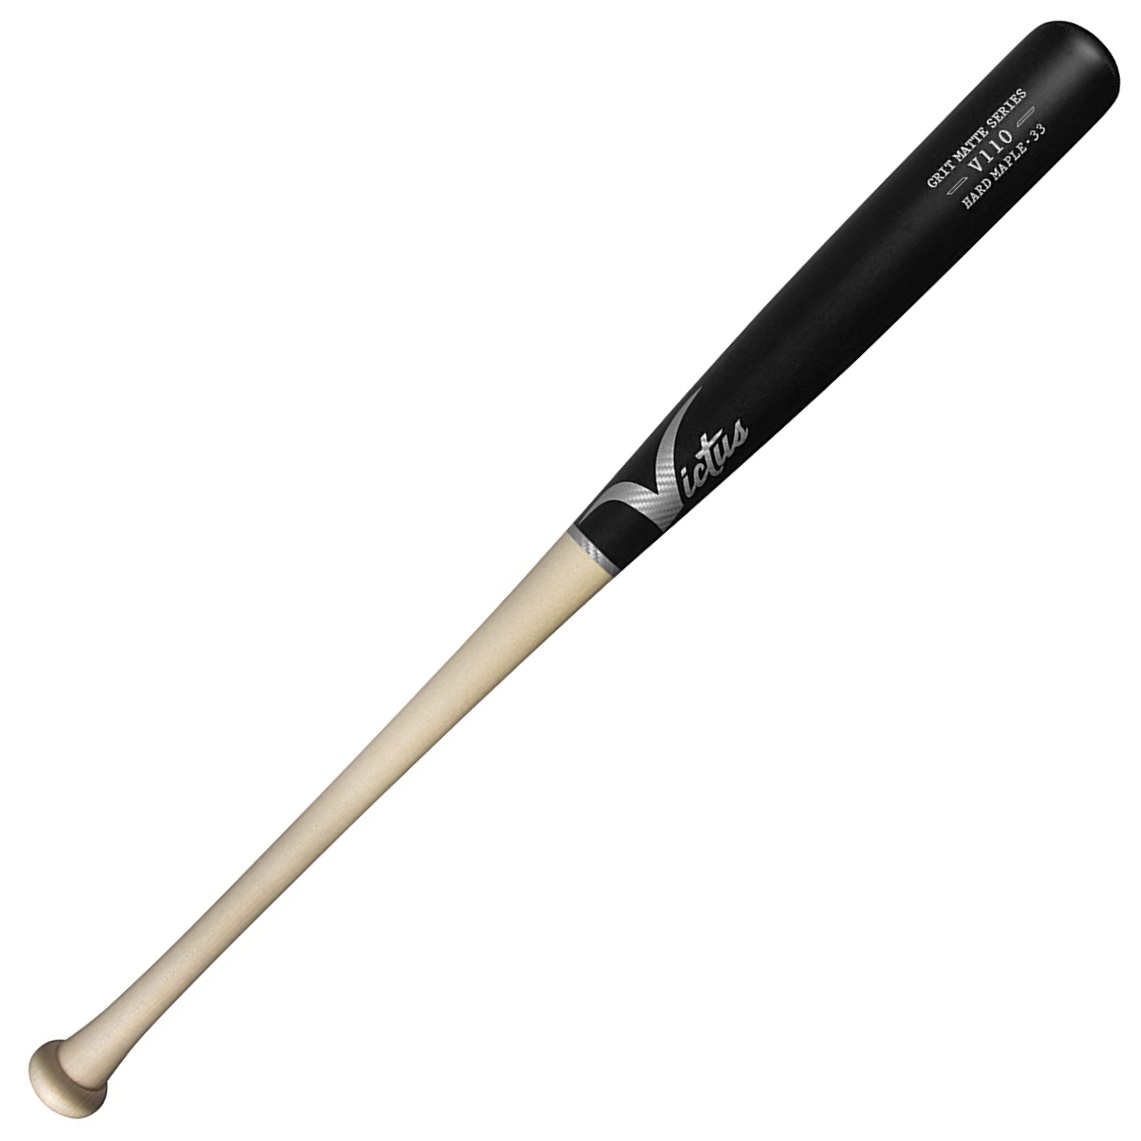 victus-v110-maple-grit-matte-reserve-natural-black-maple-wood-baseball-bat-32-inch VMRWMV110-NTBK-32 Victus  Balance is the name of the game with this cut. The